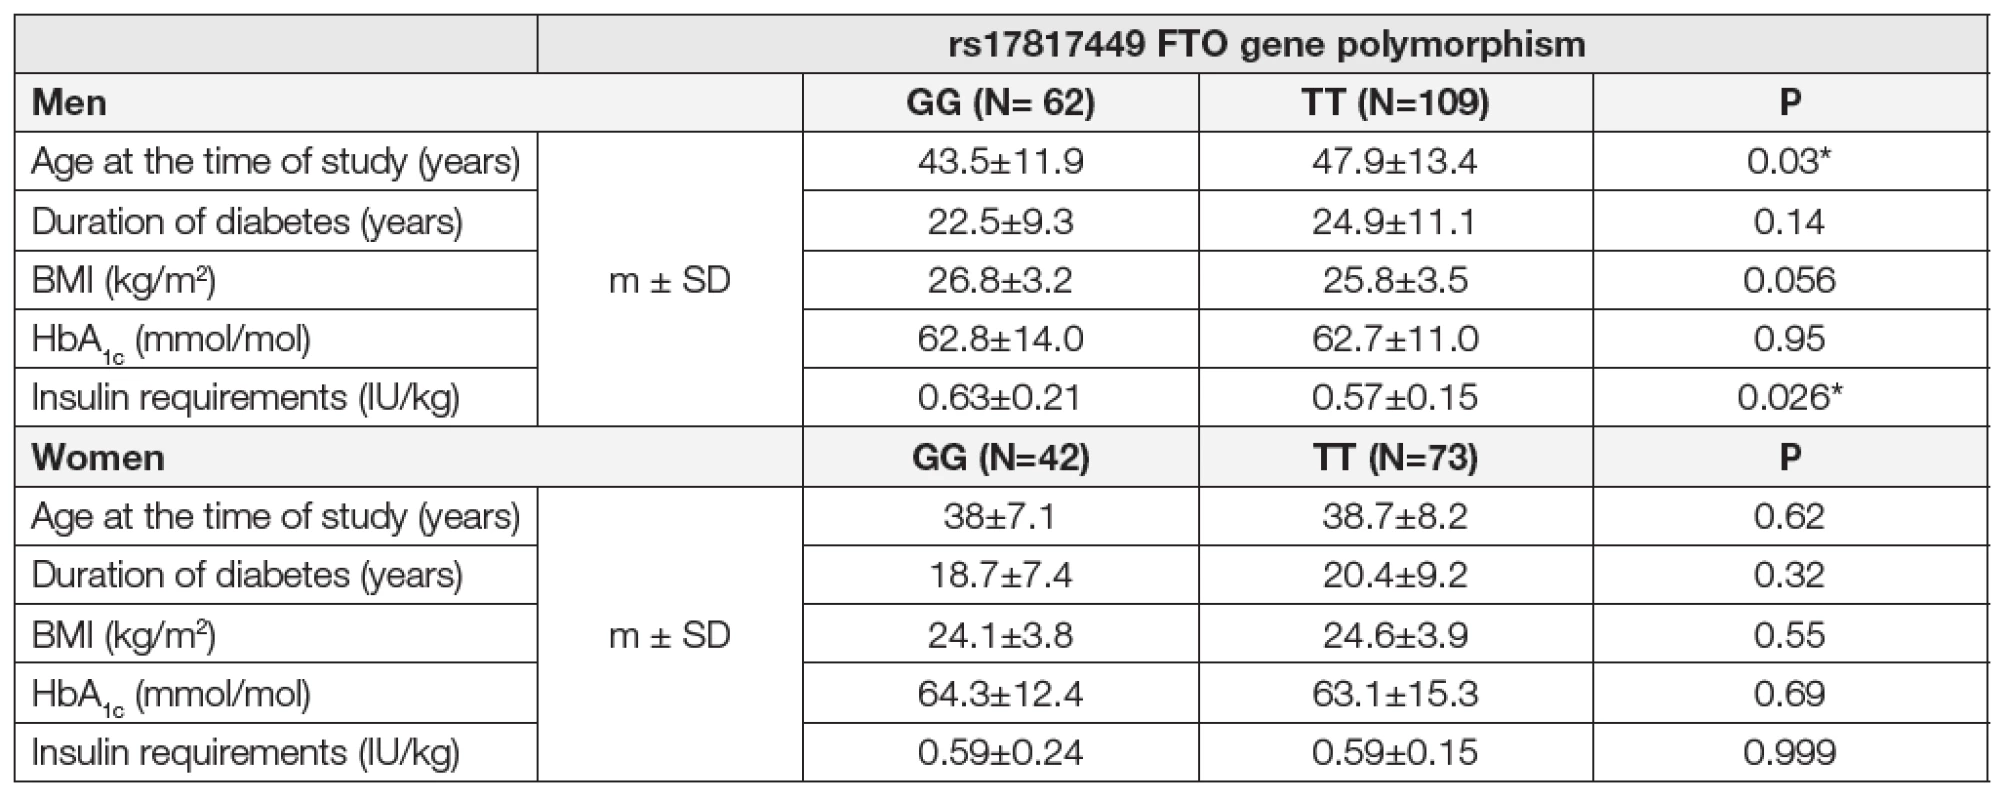 Impact of the rs17817449 FTO gene polymorphism on selected parametres in type 1 diabetics.